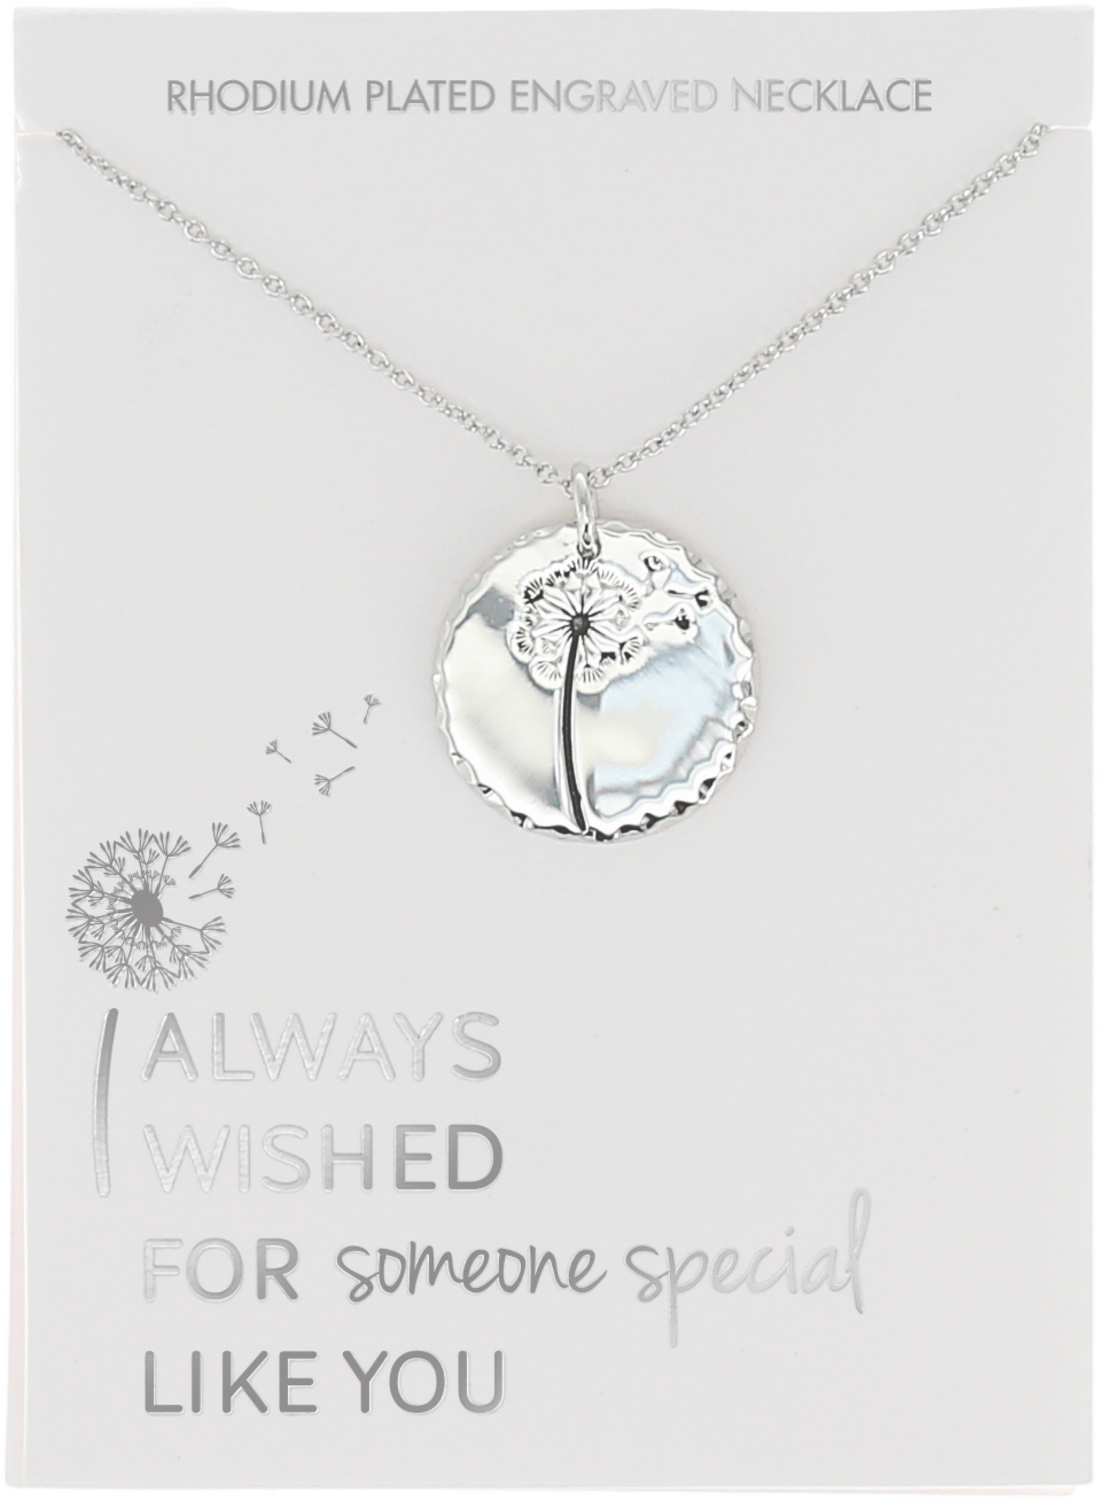 Someone Special by I Always Wished - Someone Special - 16.5"-18.5" Engraved Rhodium Plated  Necklace